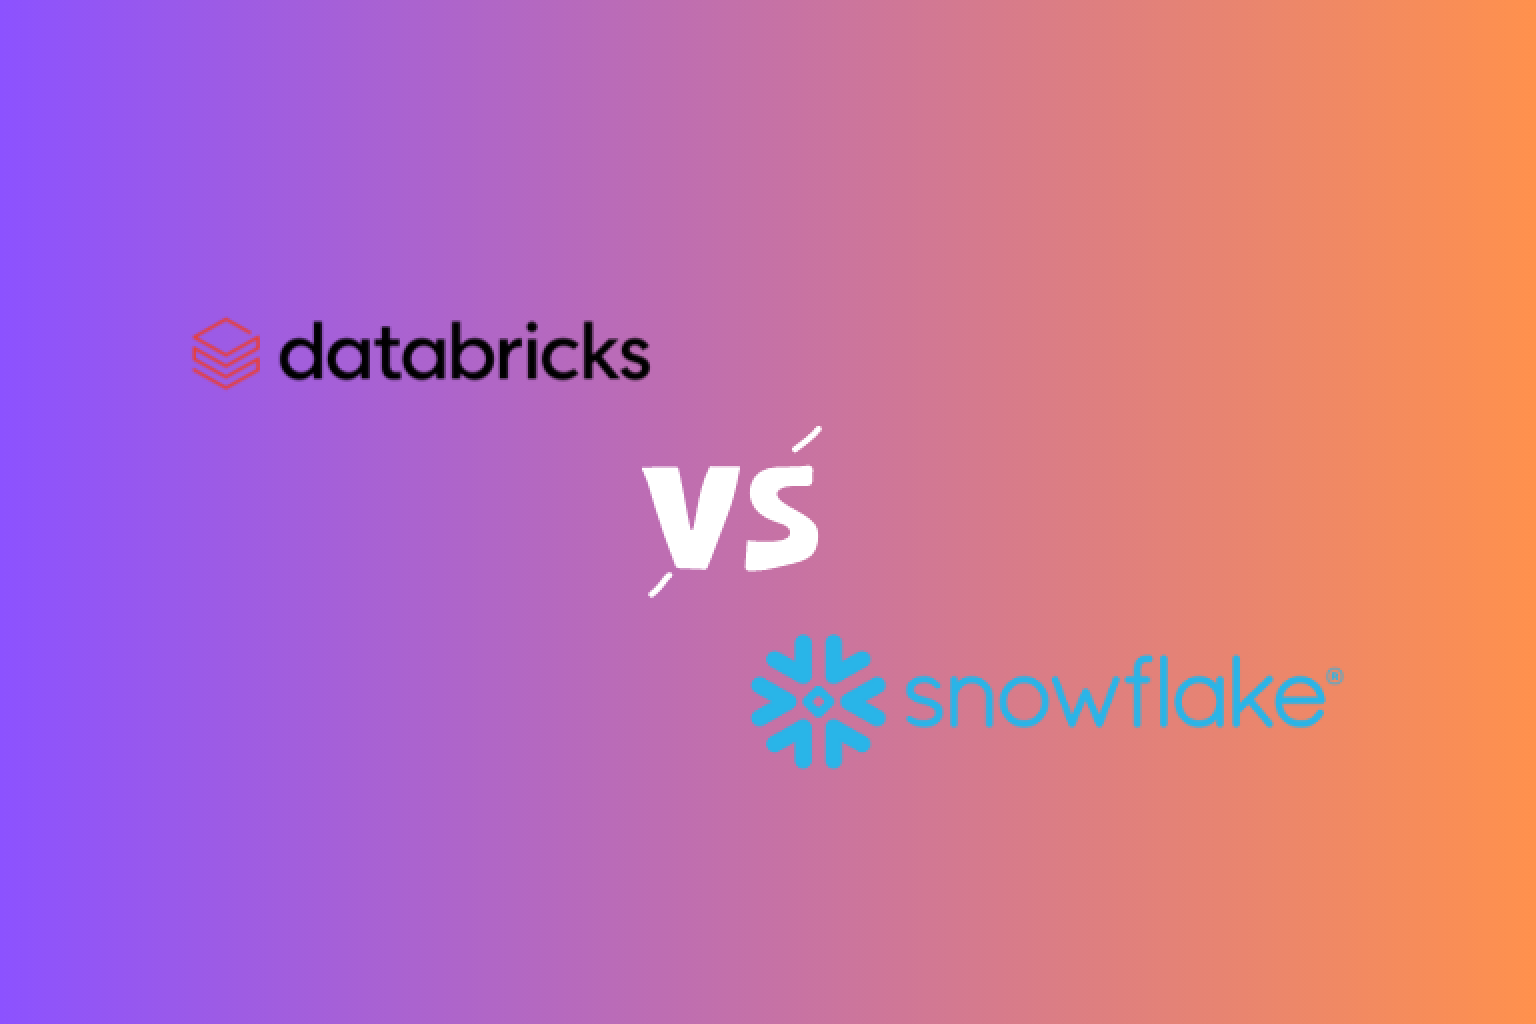 Discover the key differences between Databricks and Snowflake, two leading data platforms. Learn about their benefits, drawbacks, and find out which one is right for your needs.